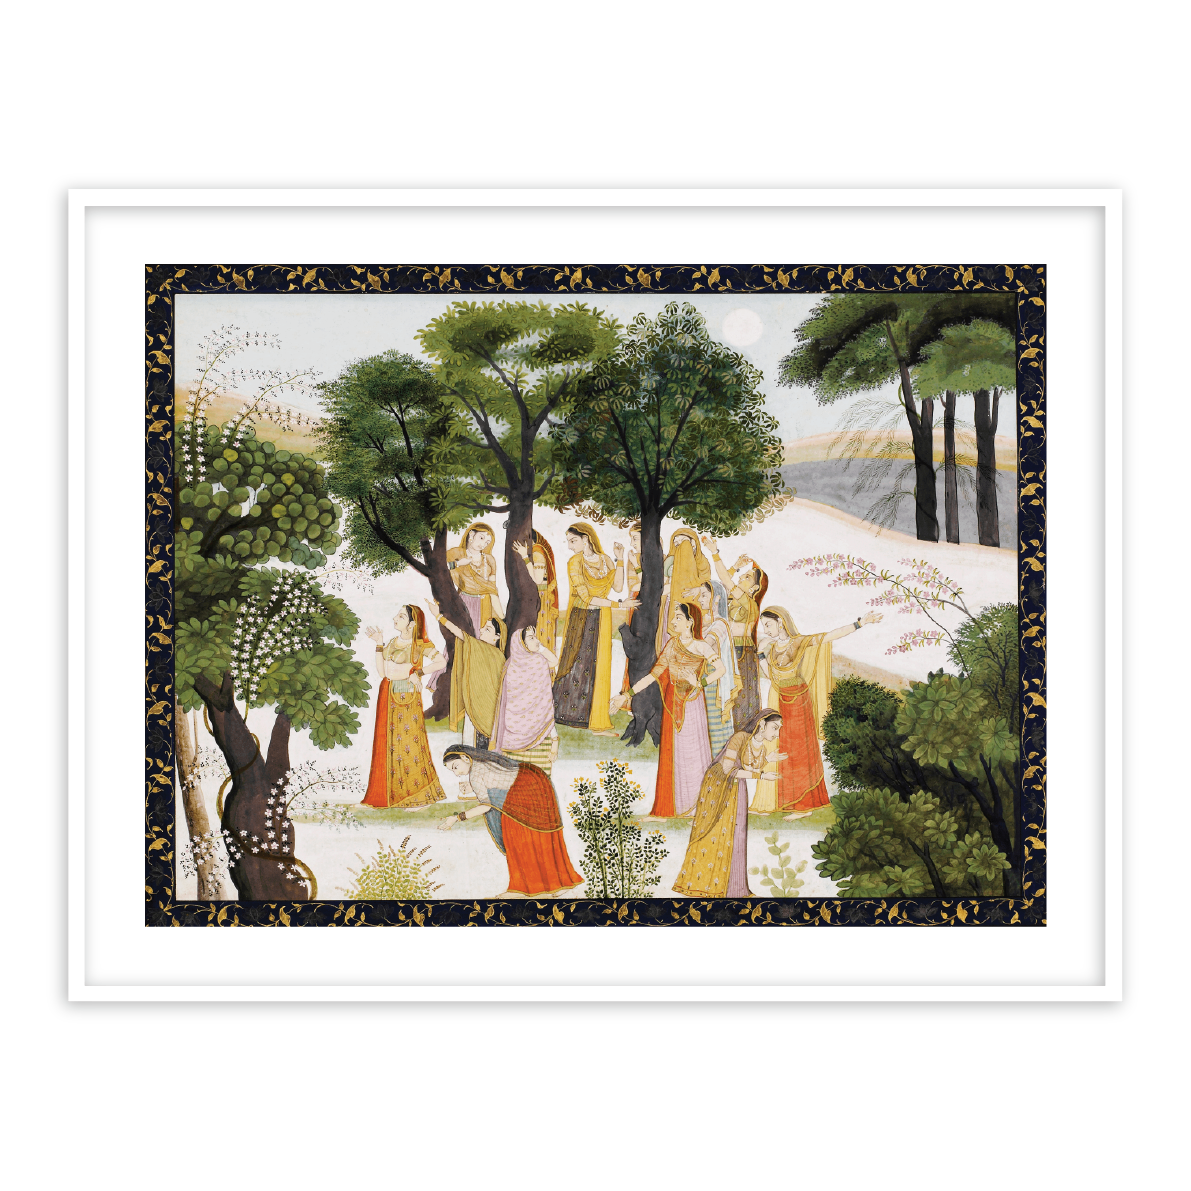 The Gopis Search for Krishna from a Bhagavata Purana Framed Wall Art Painting